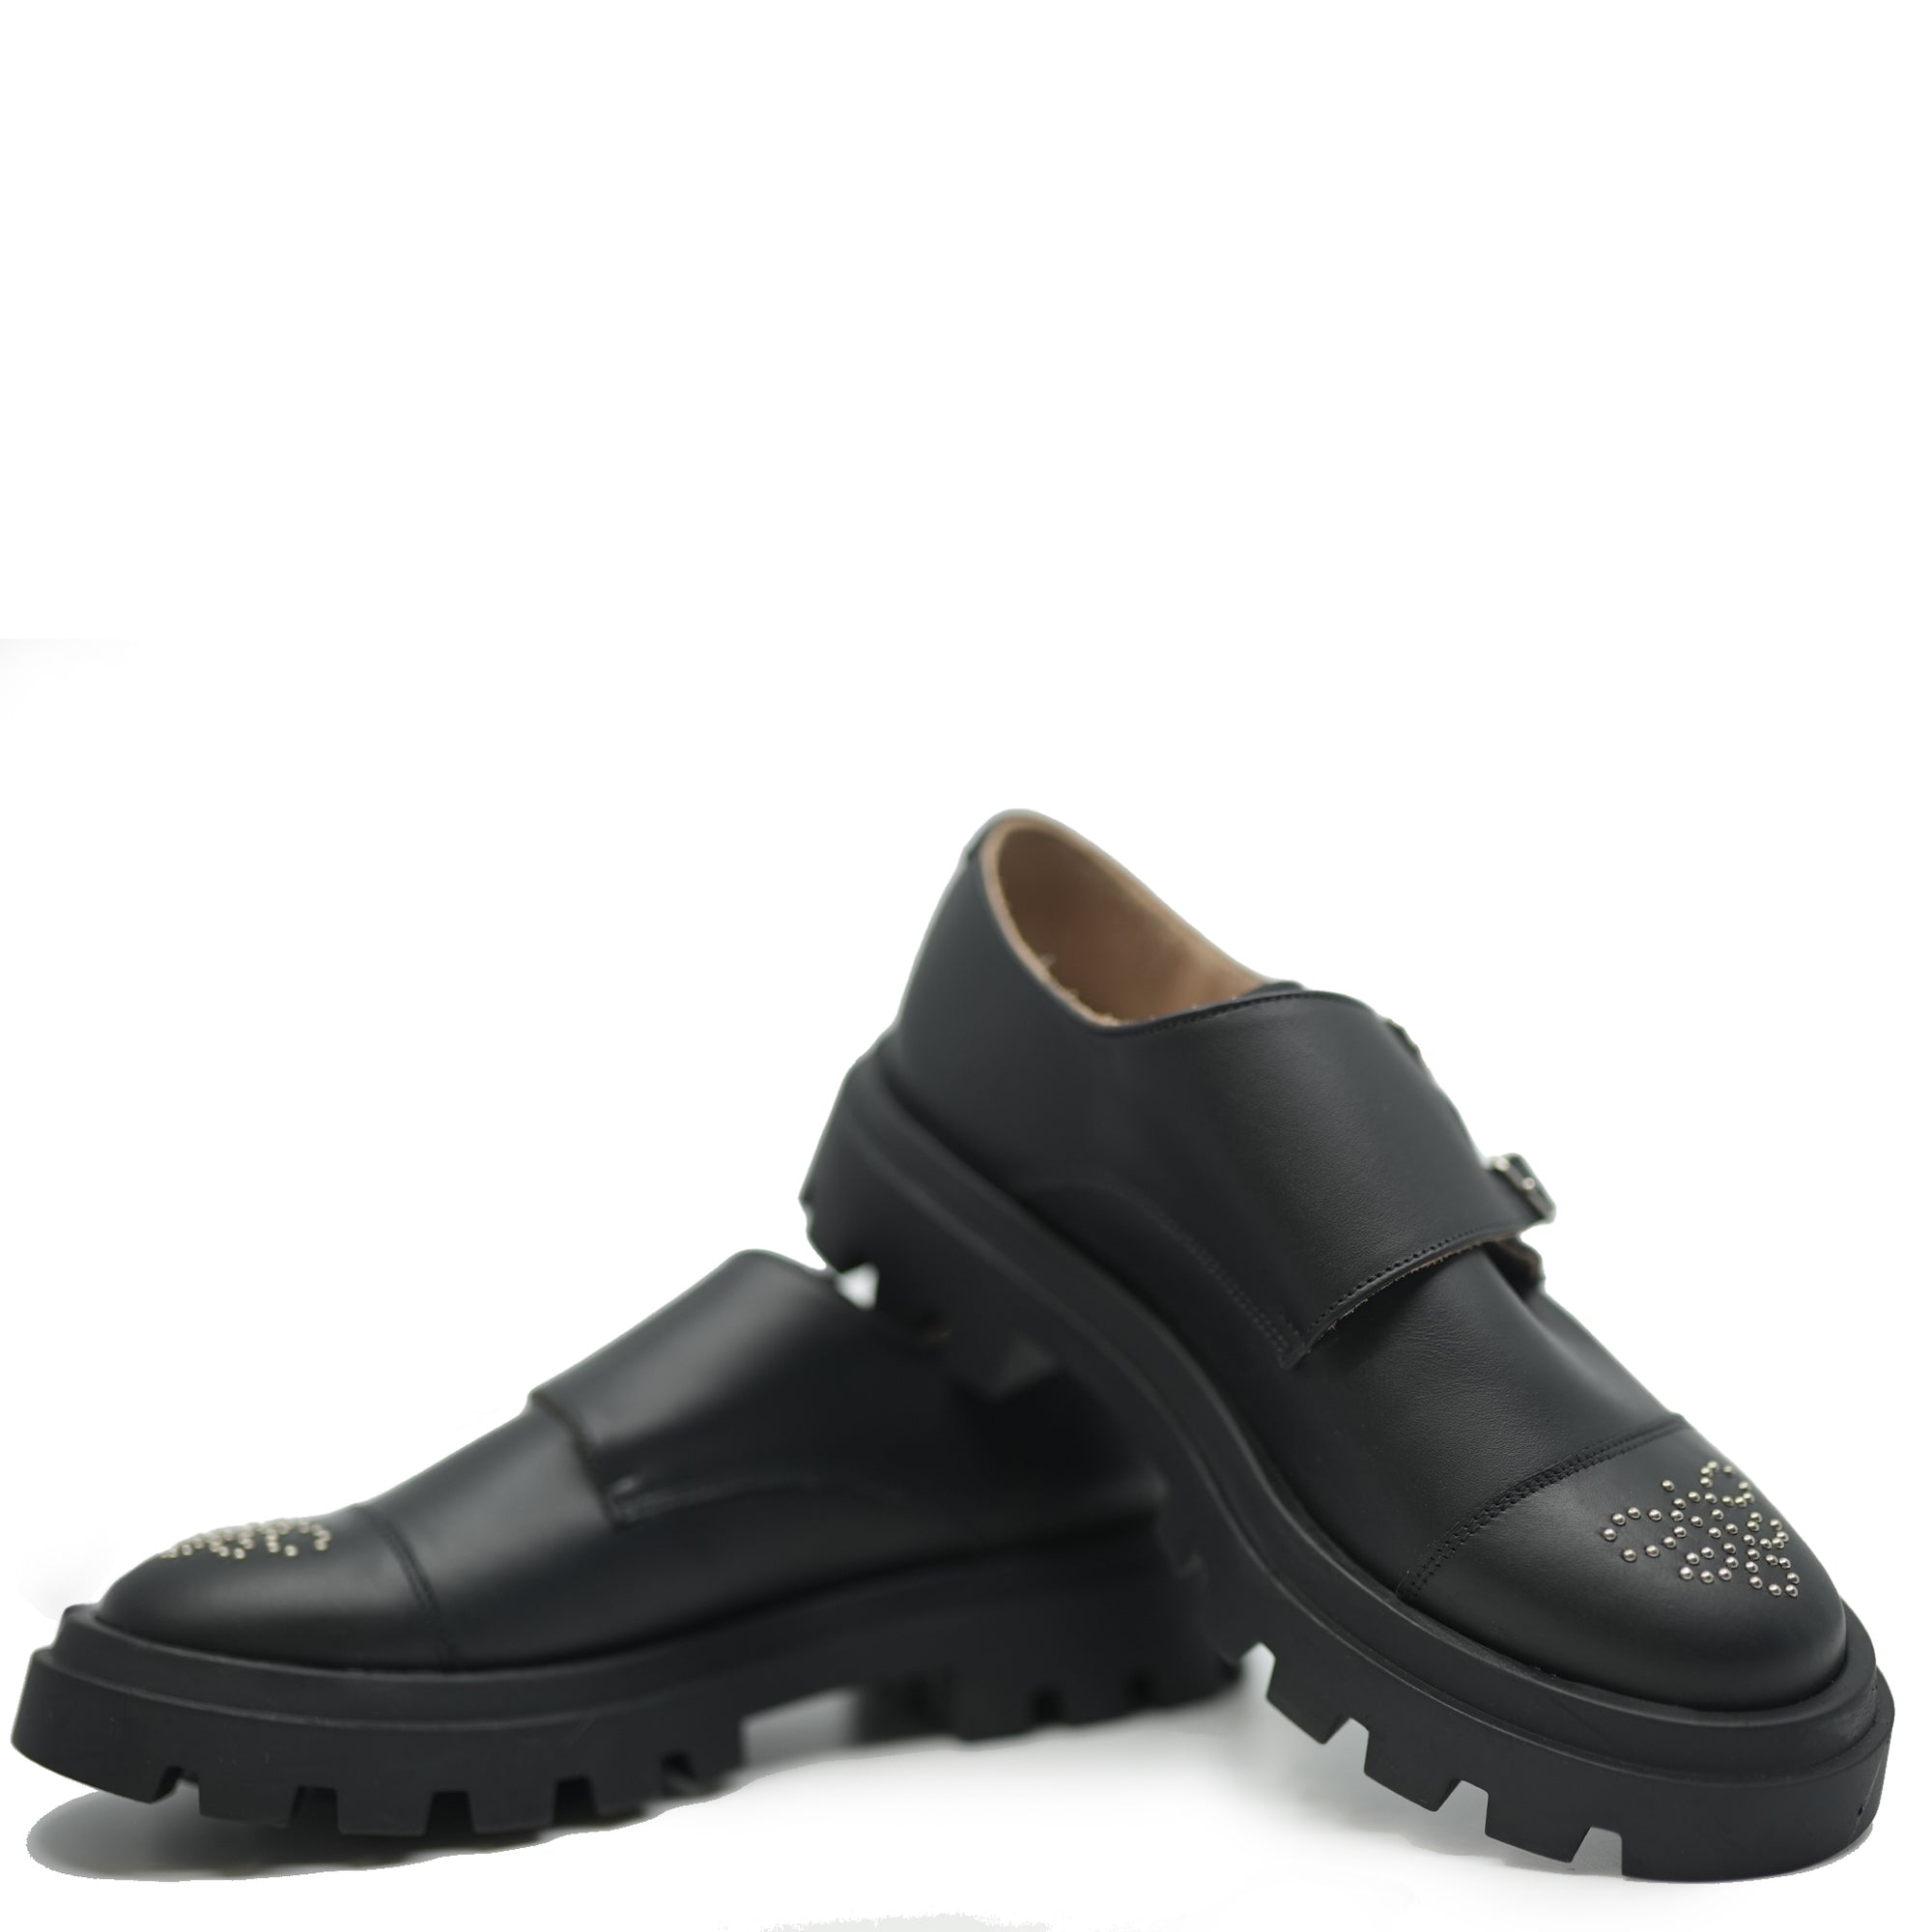 Confetti Black Double Monk Studded Chunky Loafer-Tassel Children Shoes